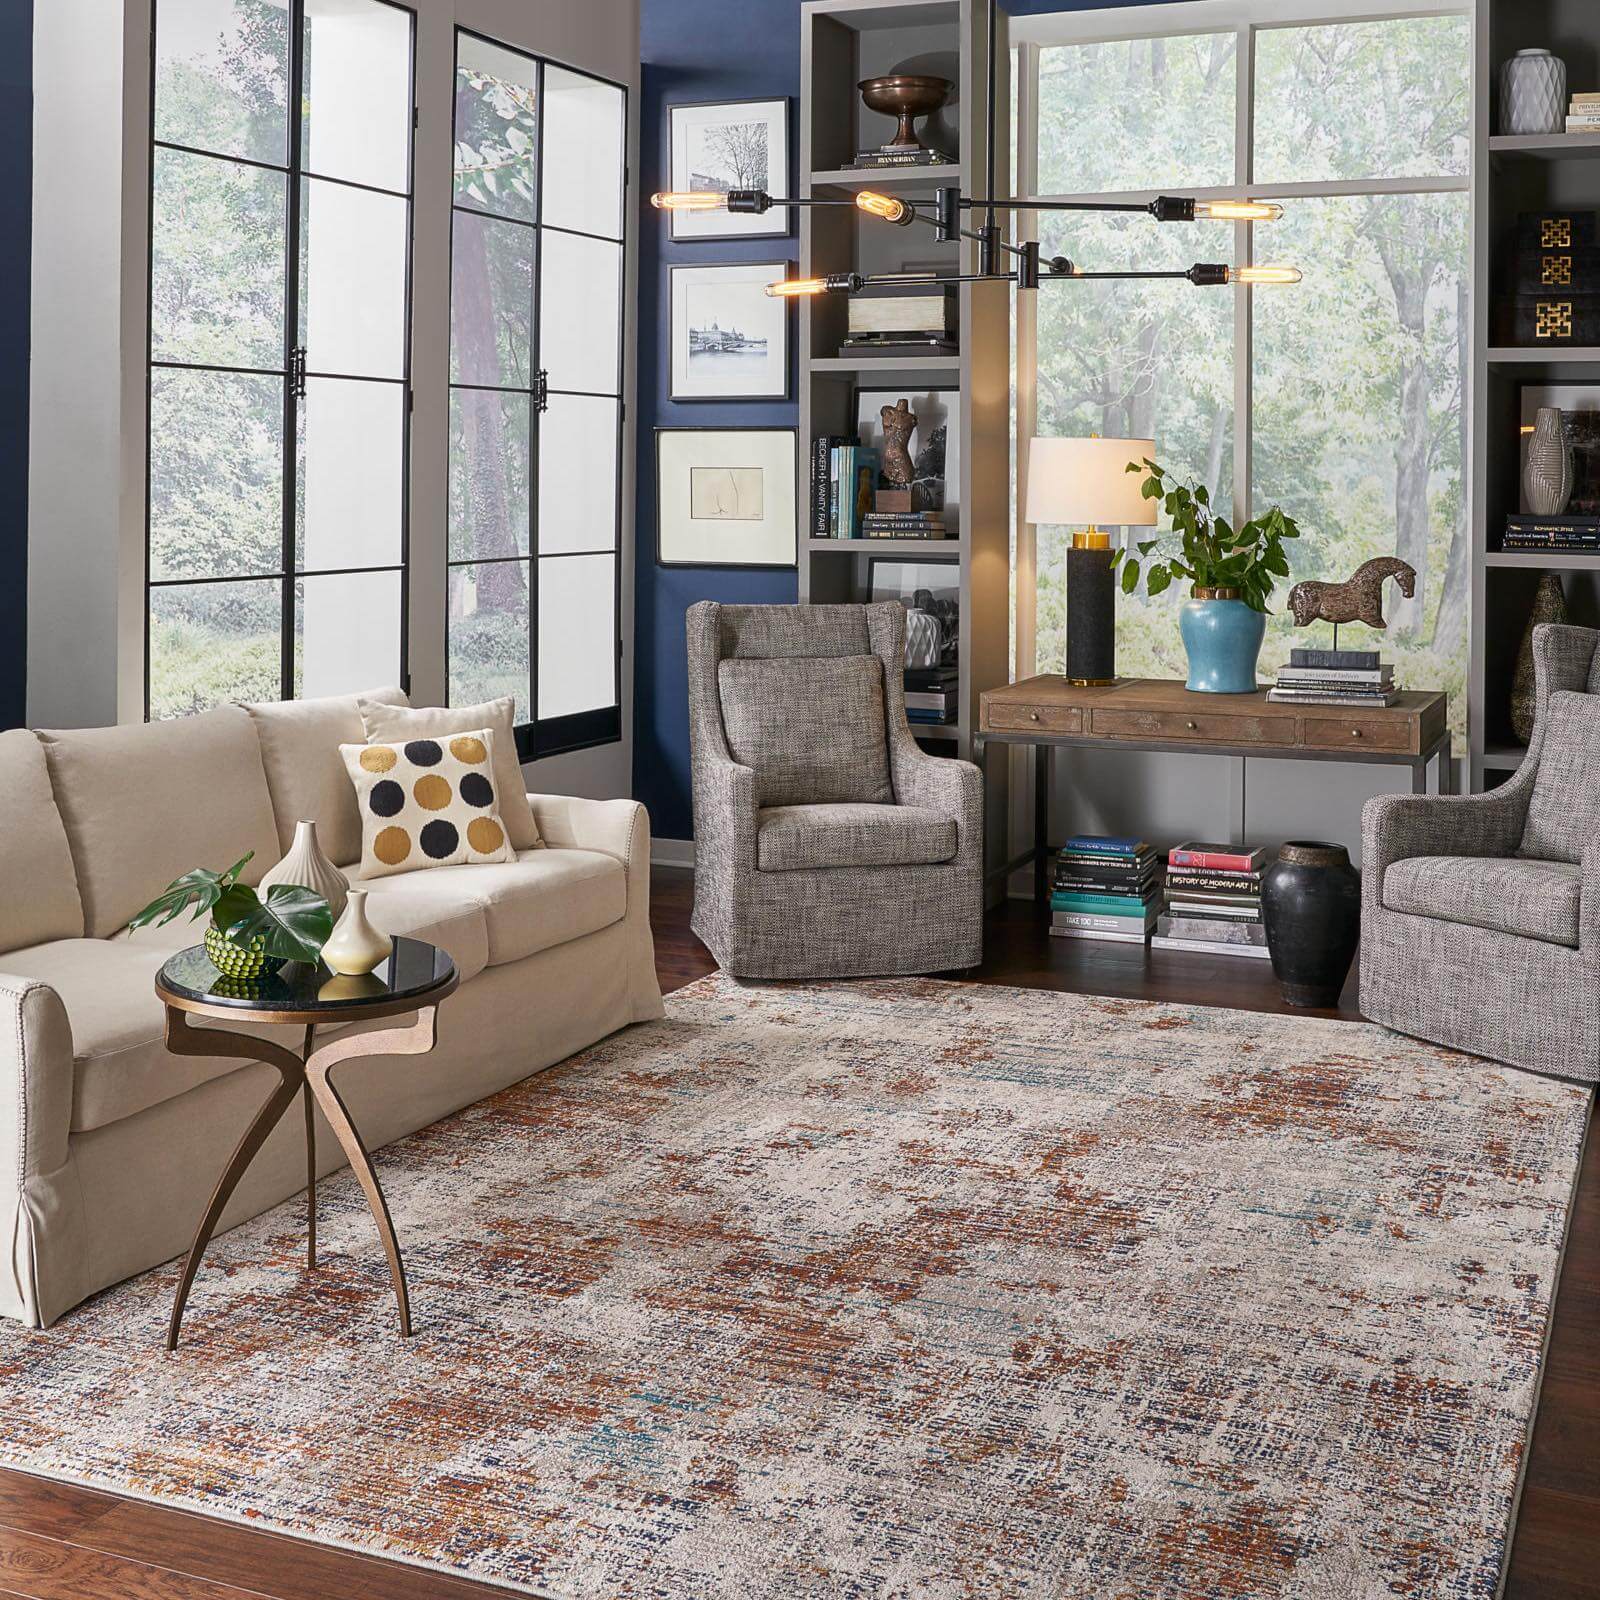 Choosing the Right Area Rug in South Florida